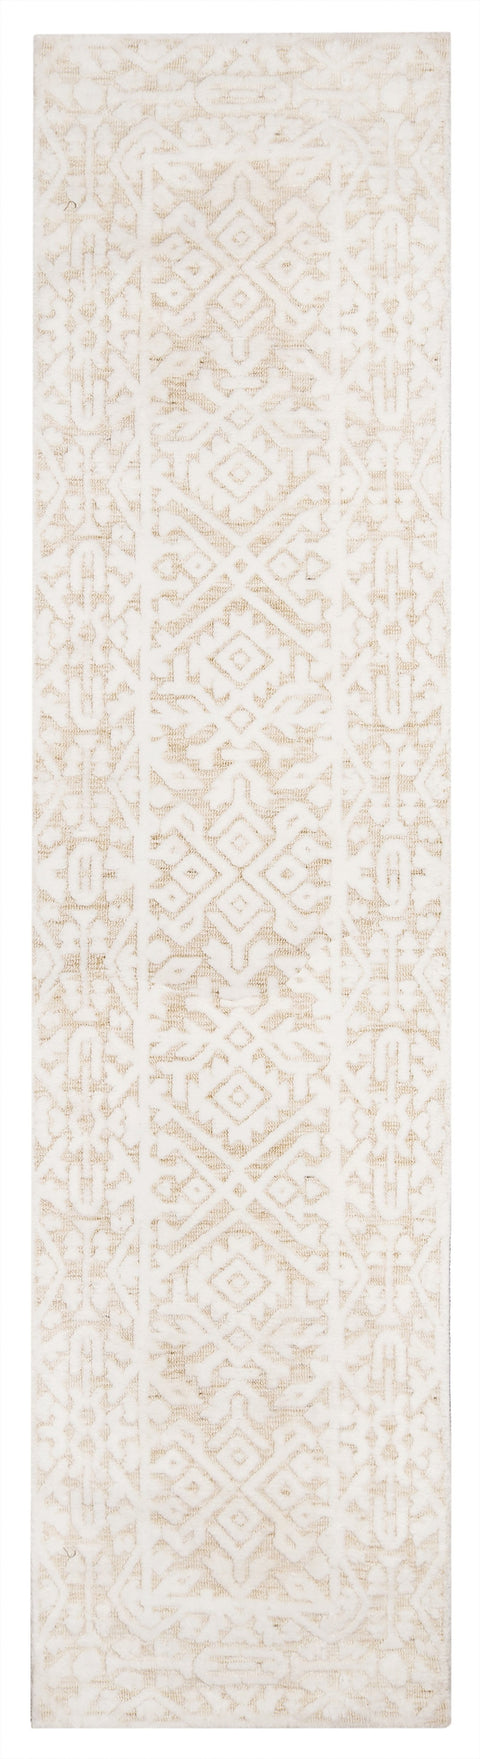 Josephine Ivory and Cream Tribal Transitional Runner Rug*NO RETURNS UNLESS FAULTY